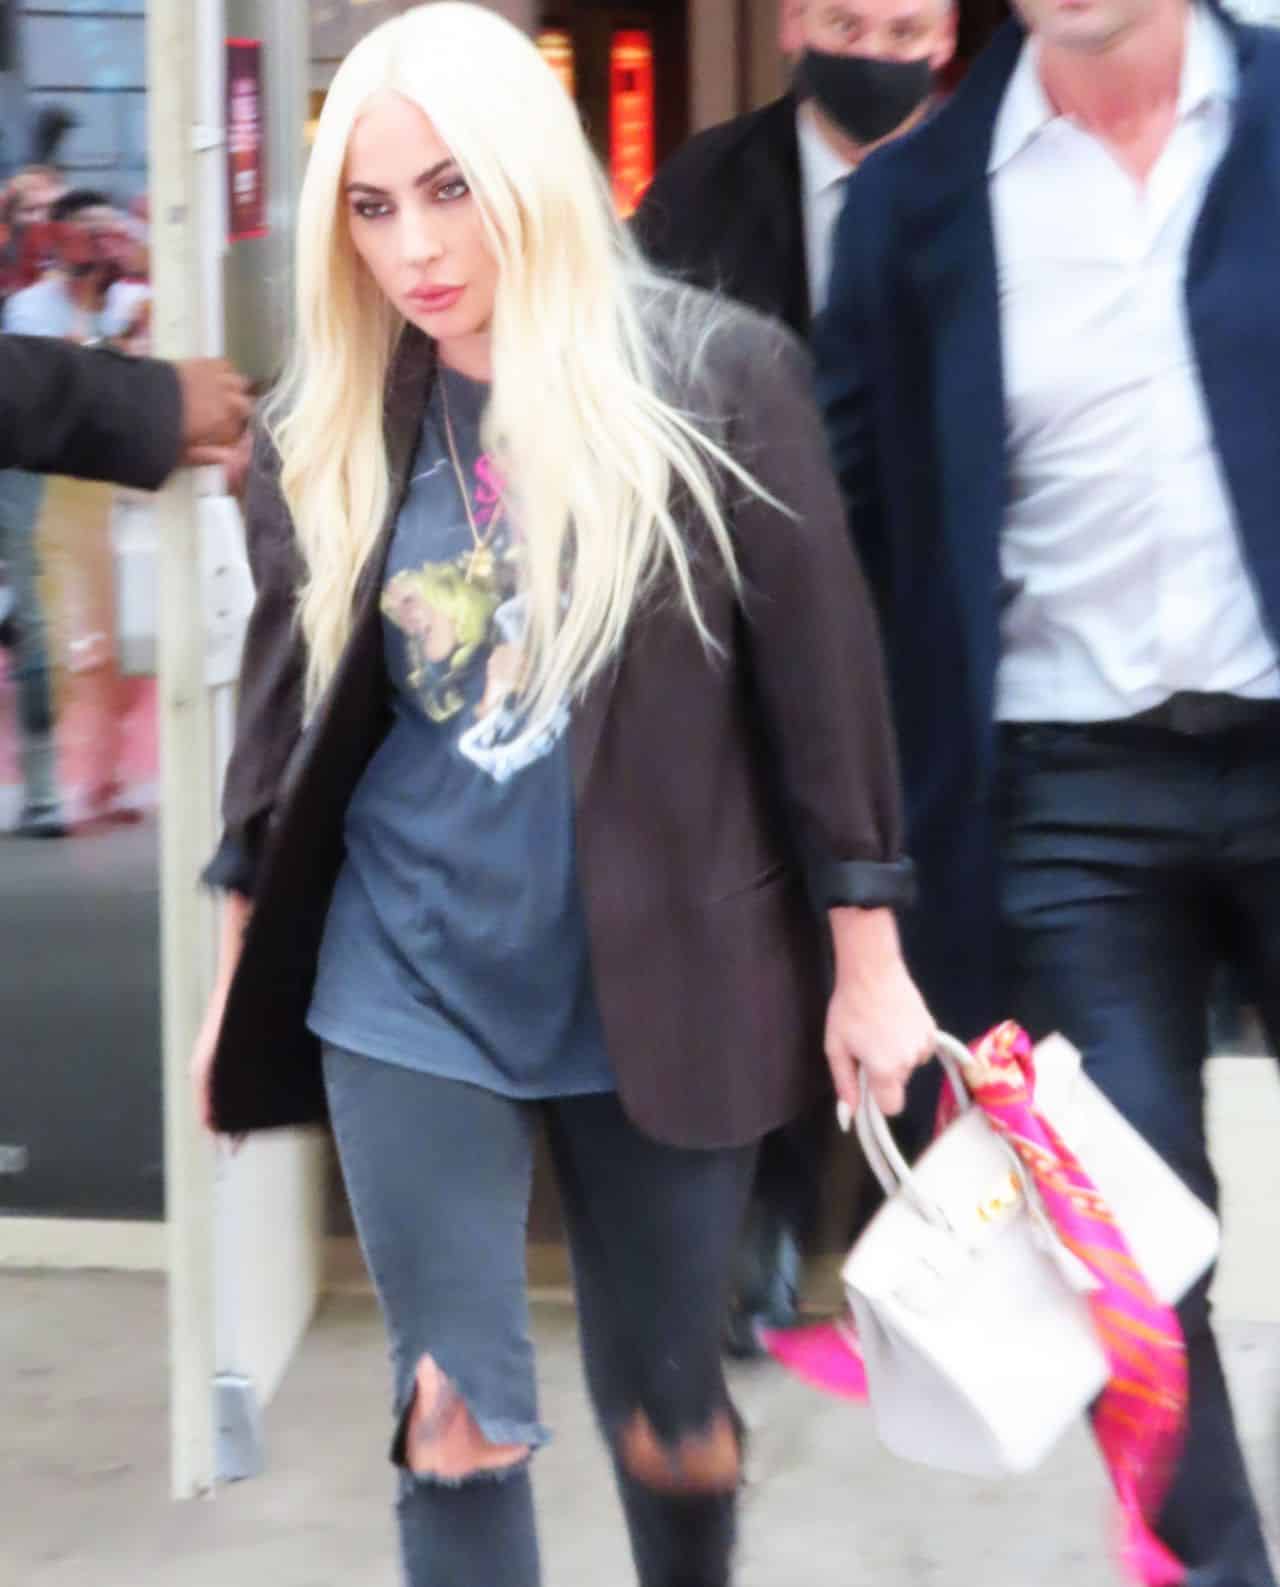 Lady Gaga Sports an Edgy Grunge Look Outside the AMC Theater in New ...